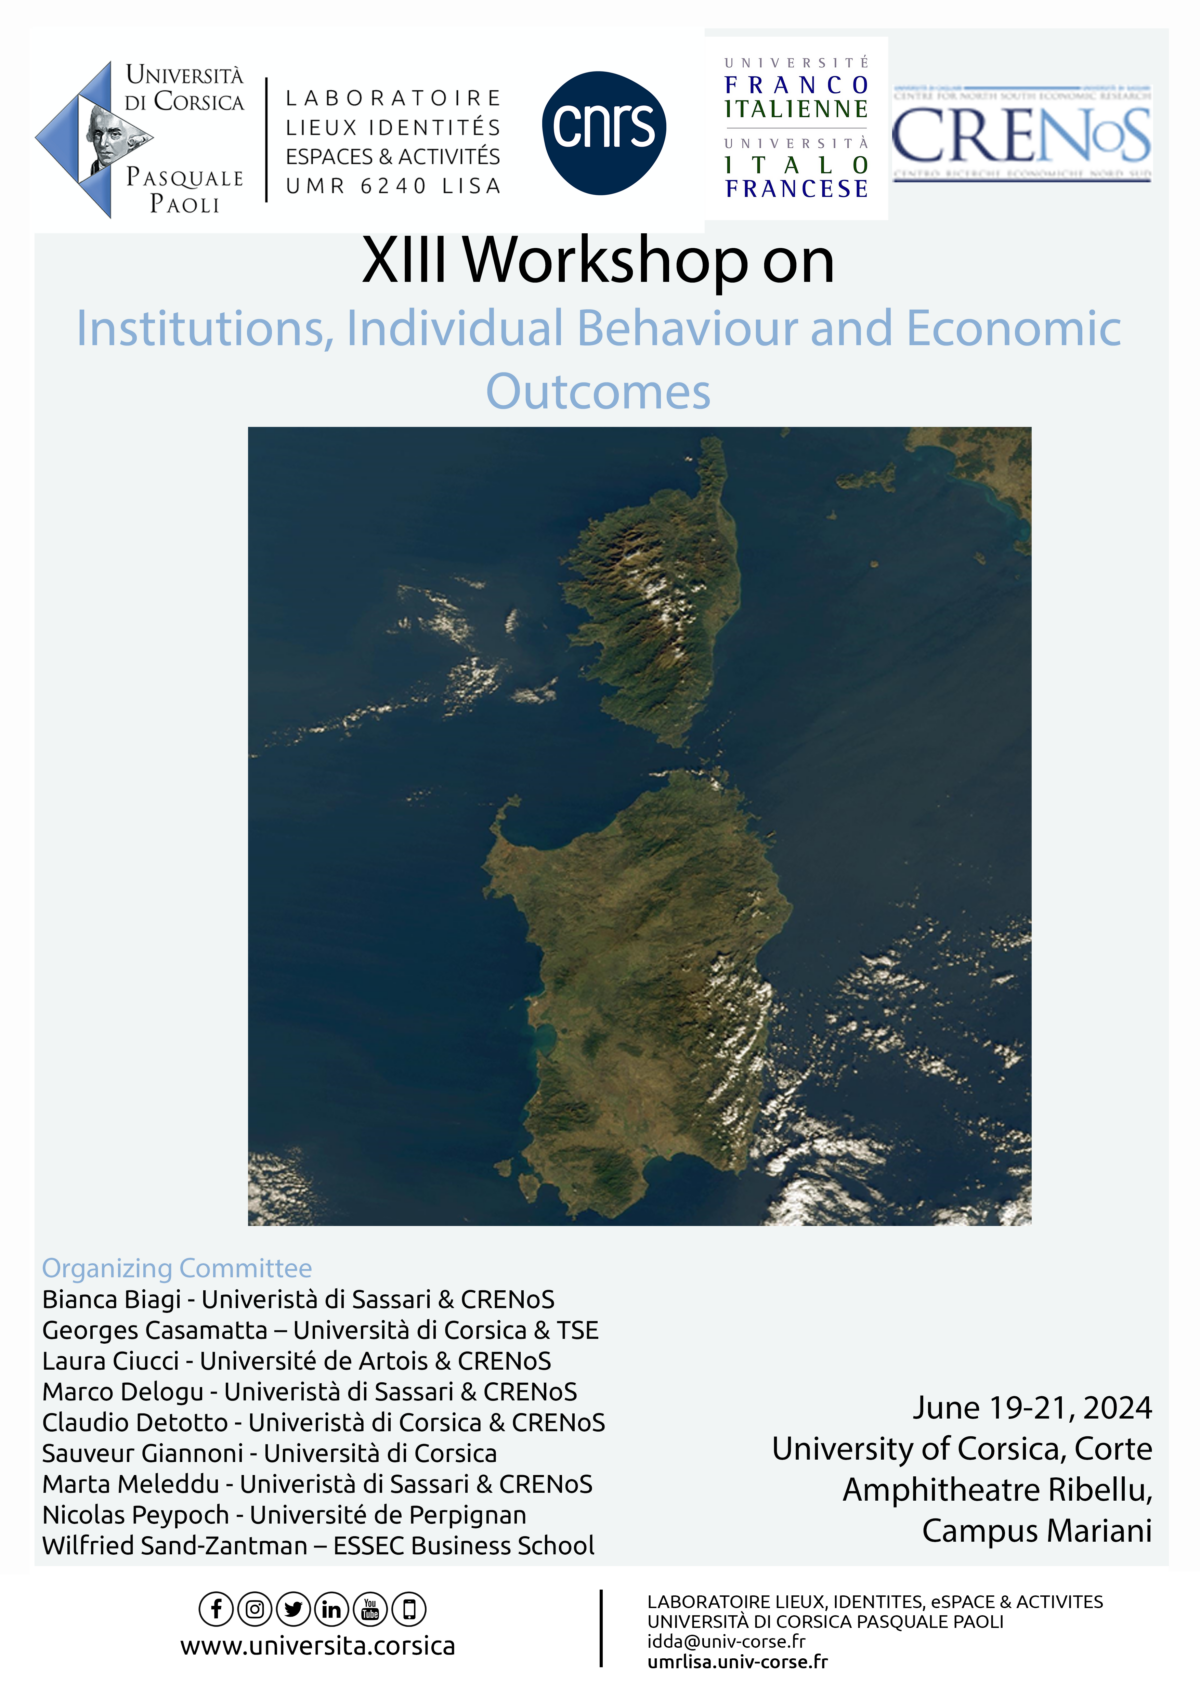 XIII Workshop IBEO on Institutions, Individual Behaviour and Economic Outcomes